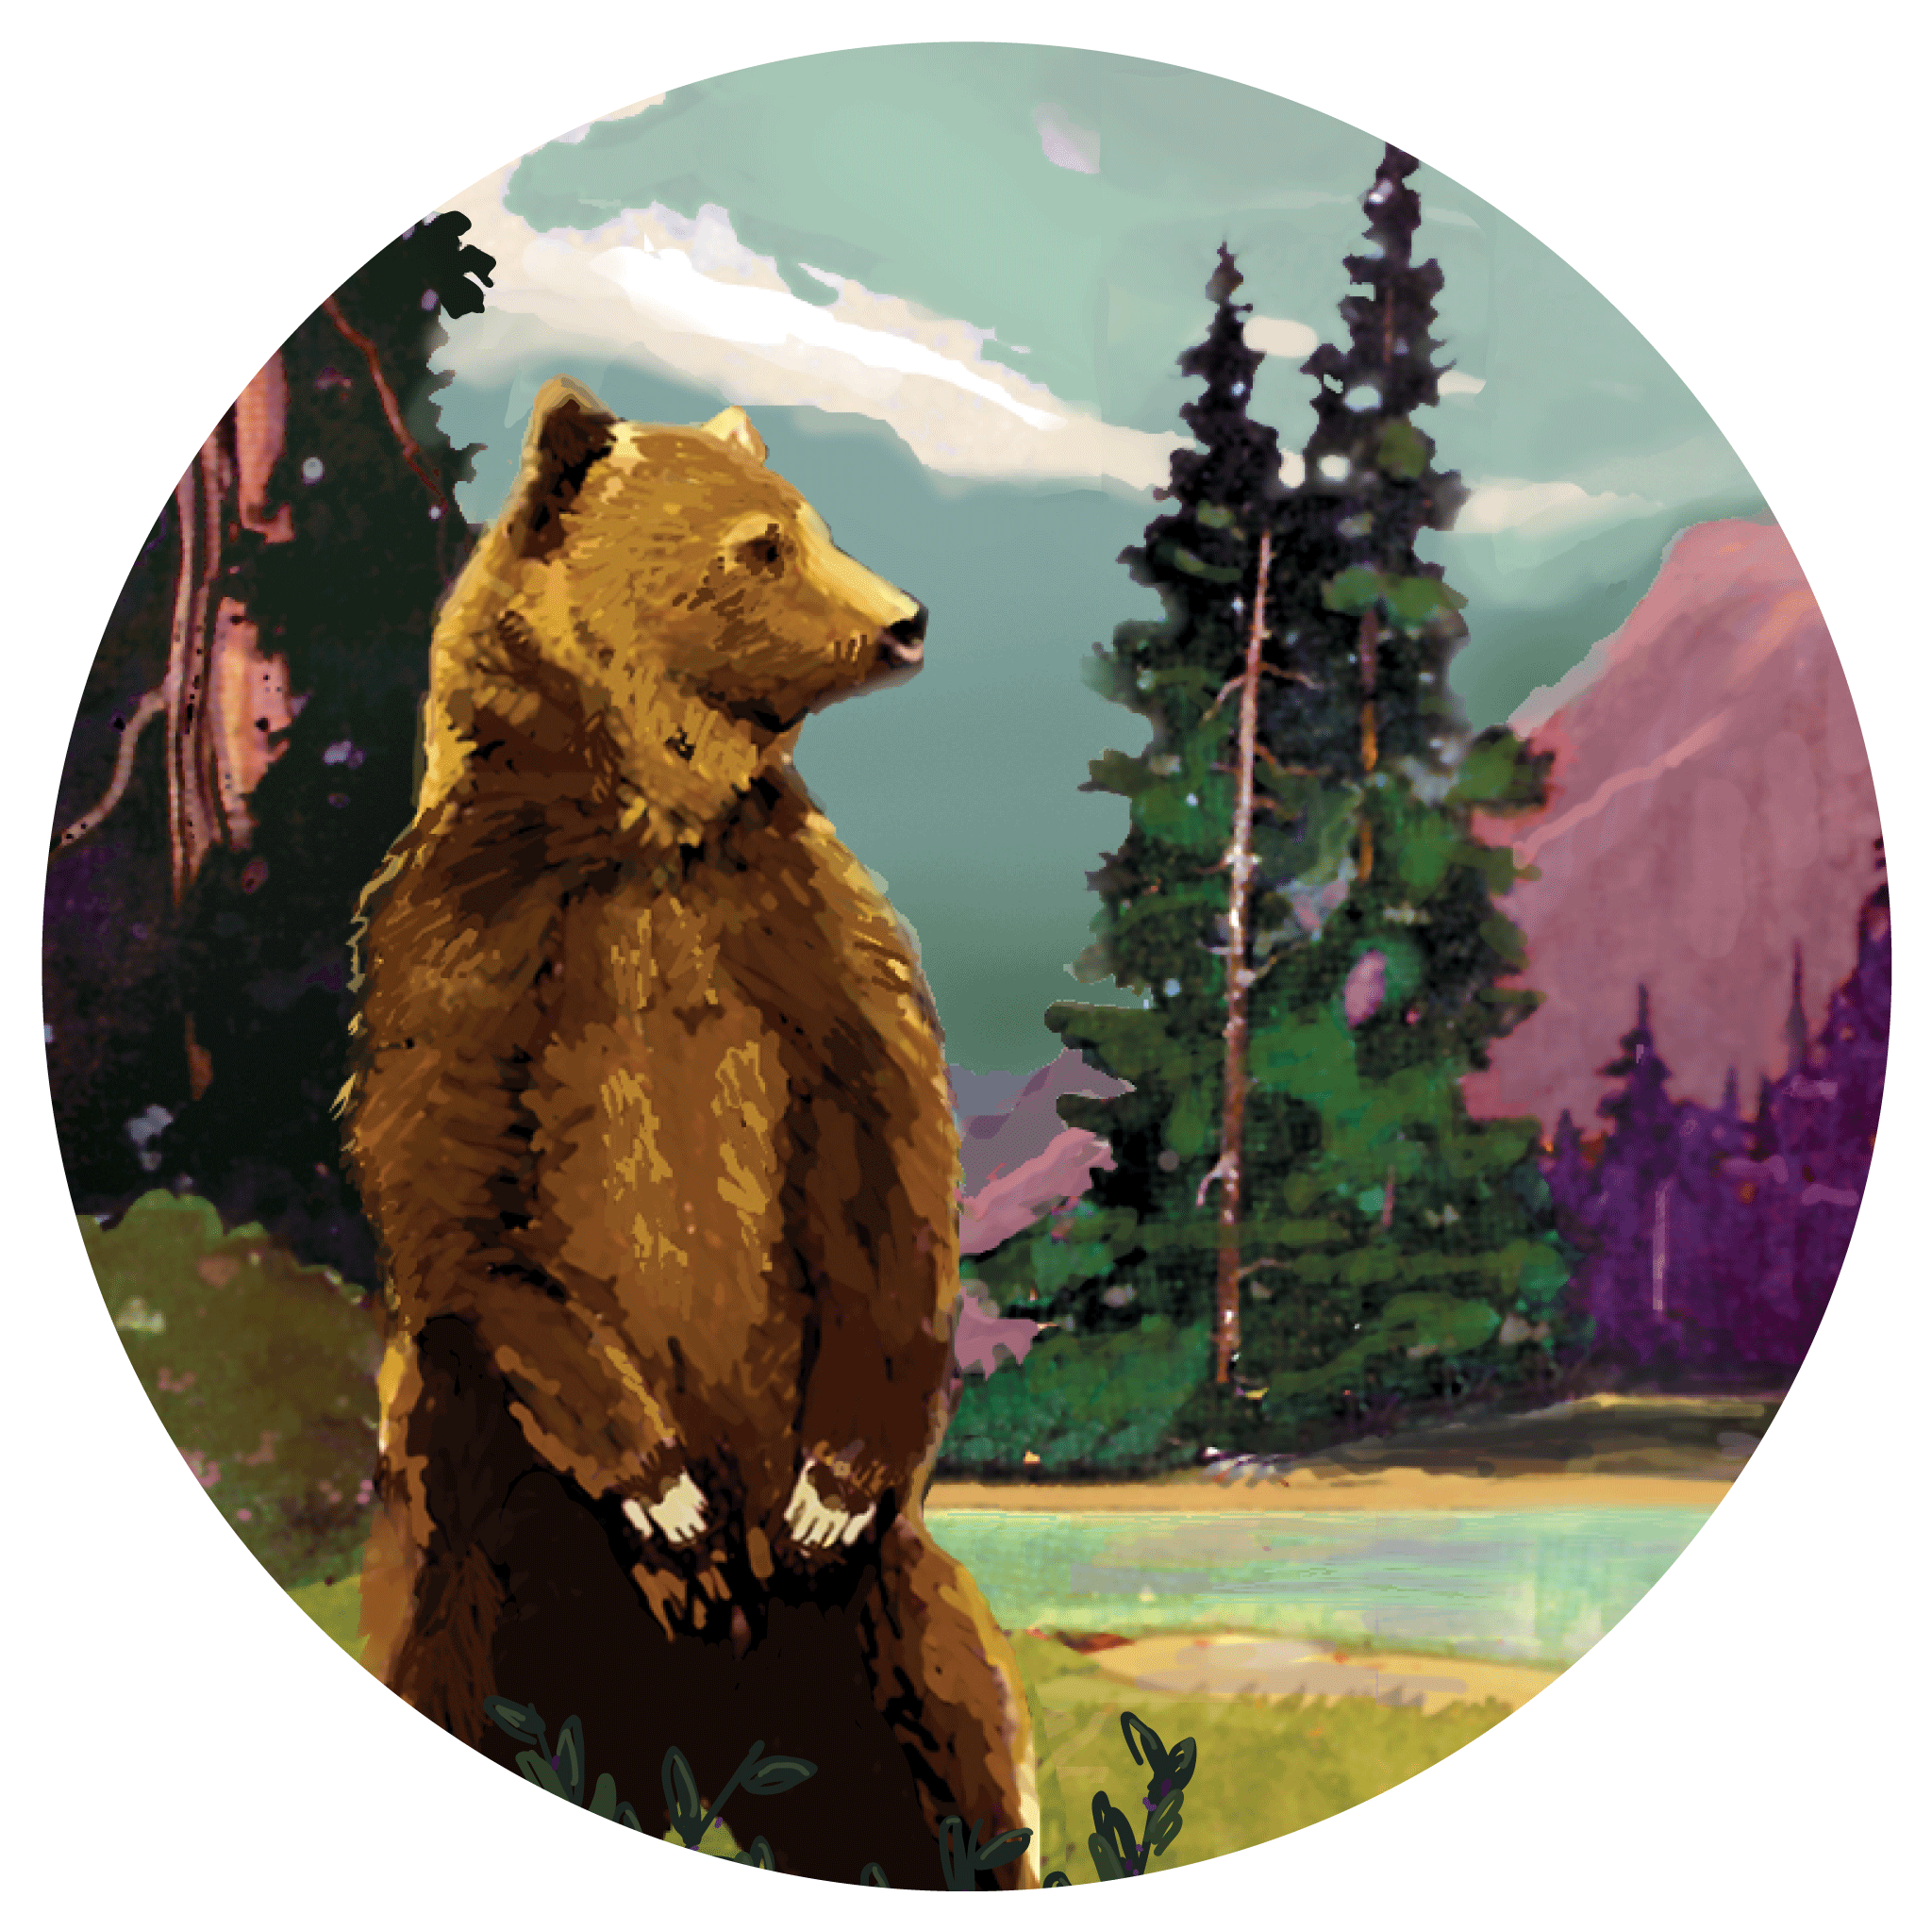 Illustration of a bear standing up on it's hind legs